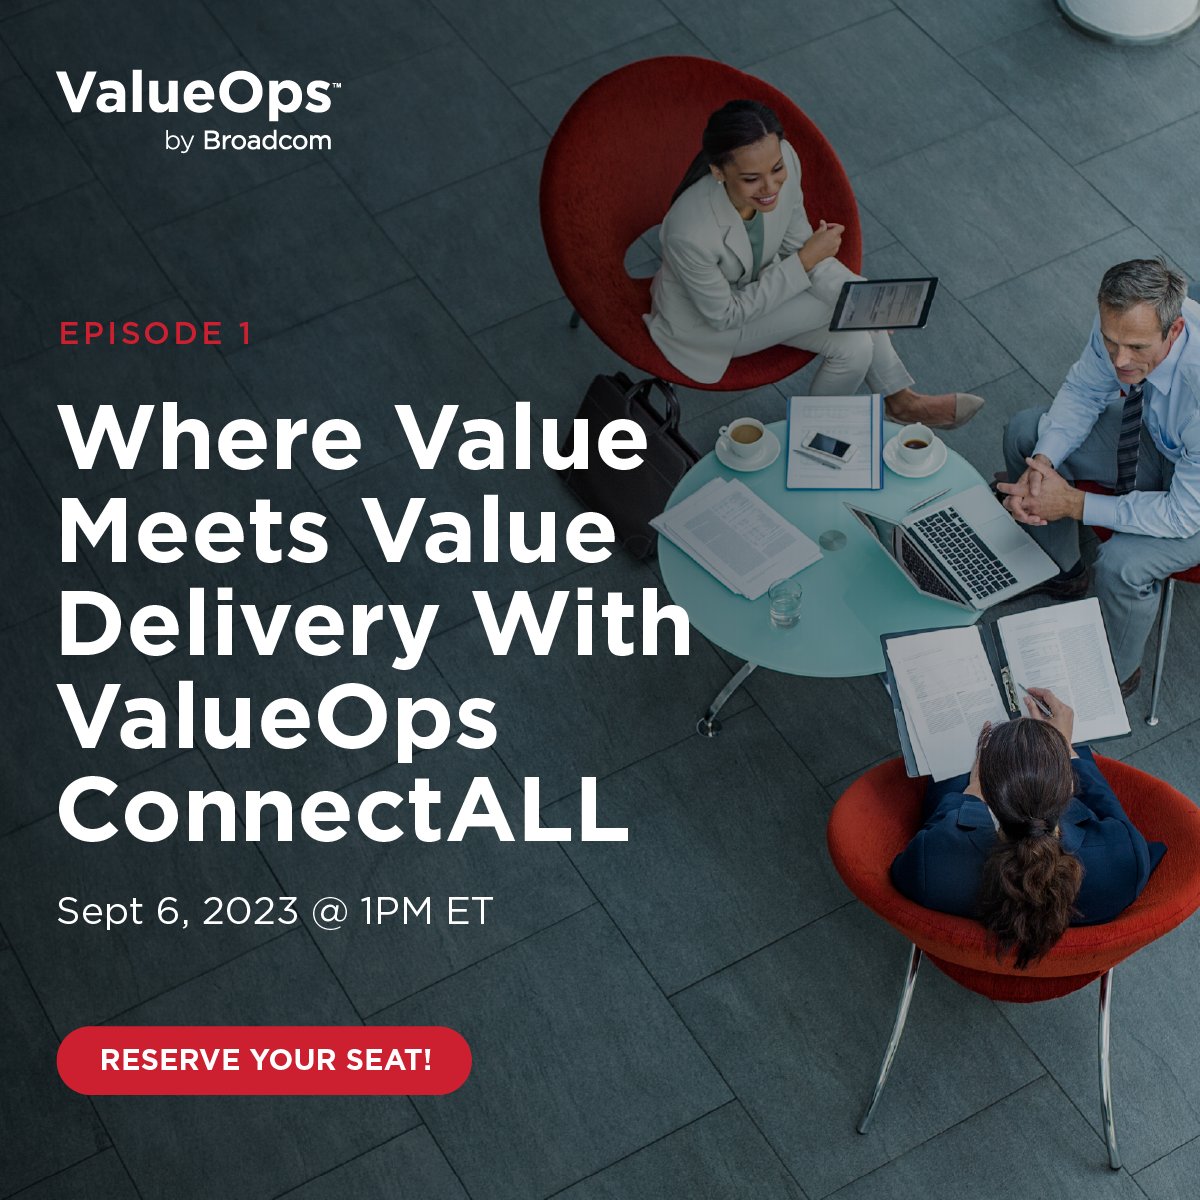 Learn how to streamline value delivery, optimize collaboration, & gain a competitive edge next week at our ValueOps ConnectALL interactive webinar. Break down silos and gain insights from @Broadcom experts @Lance Knight & @Francois Cattoen #ValueOpsVSM  bit.ly/3ED677n